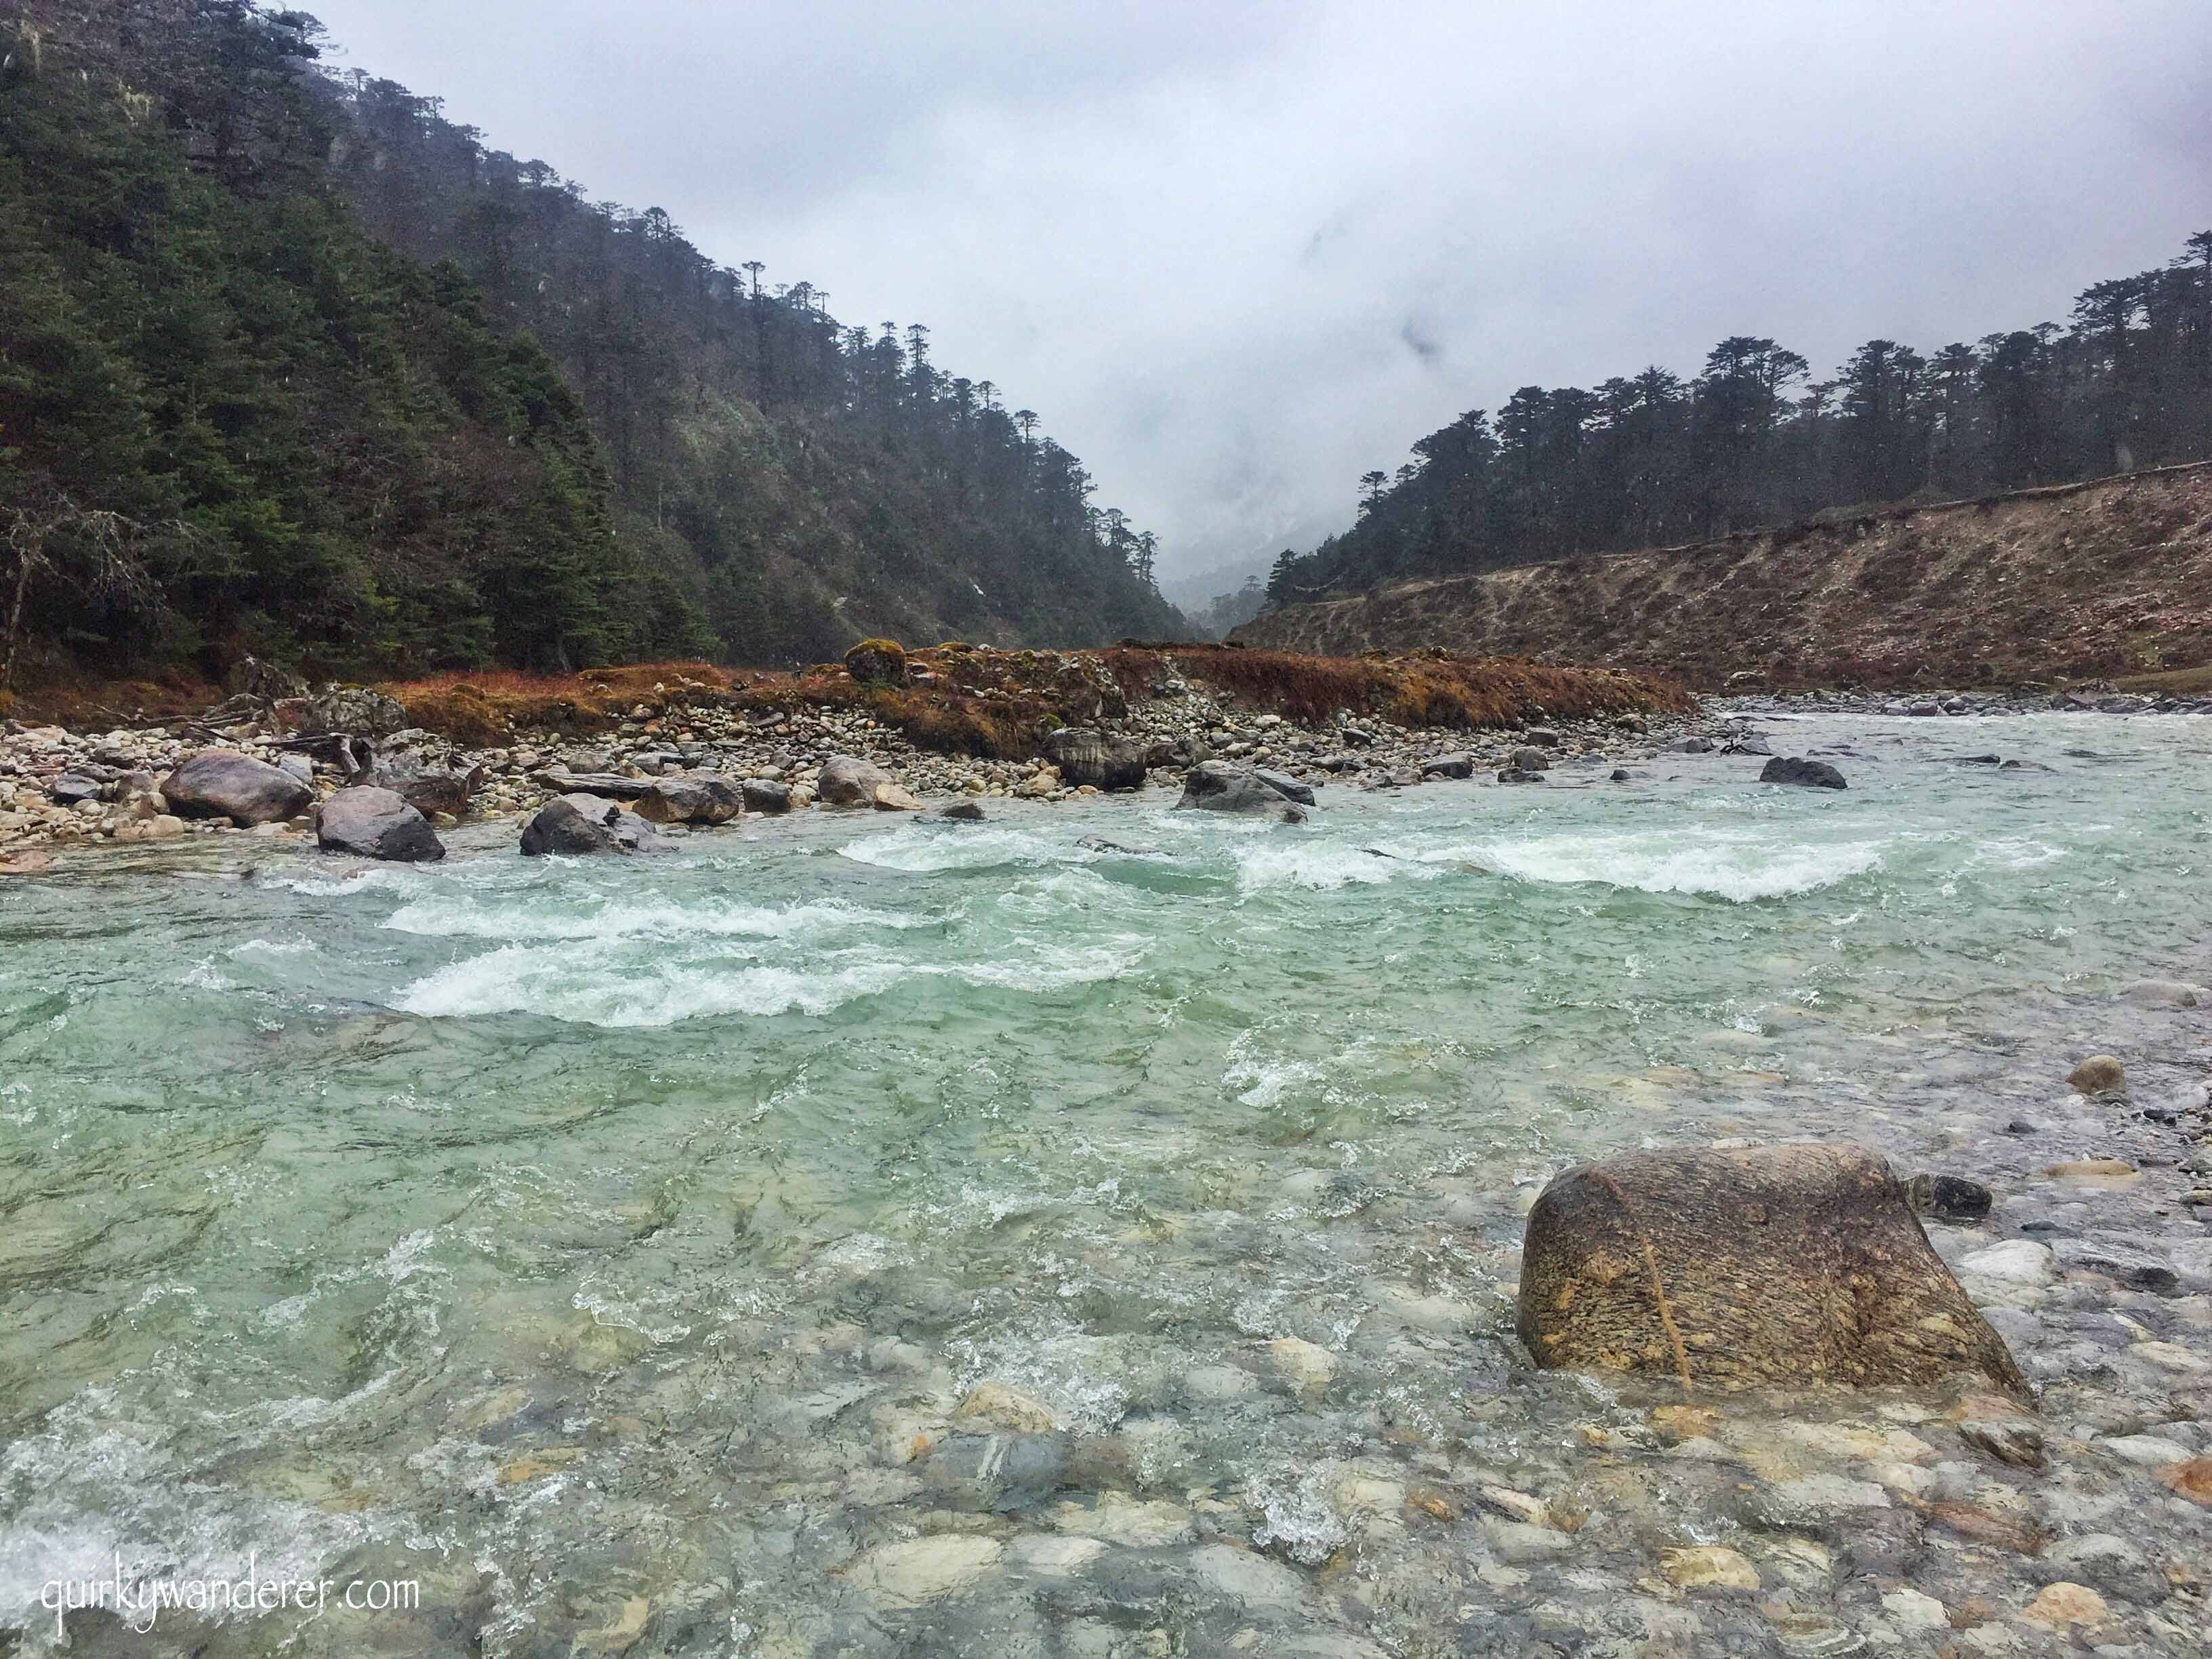 Yumthang valley in North Sikkim is known for its rhododendron blooms, dramatic scenery and the mighty Teesta river that flows in its scenic environs.